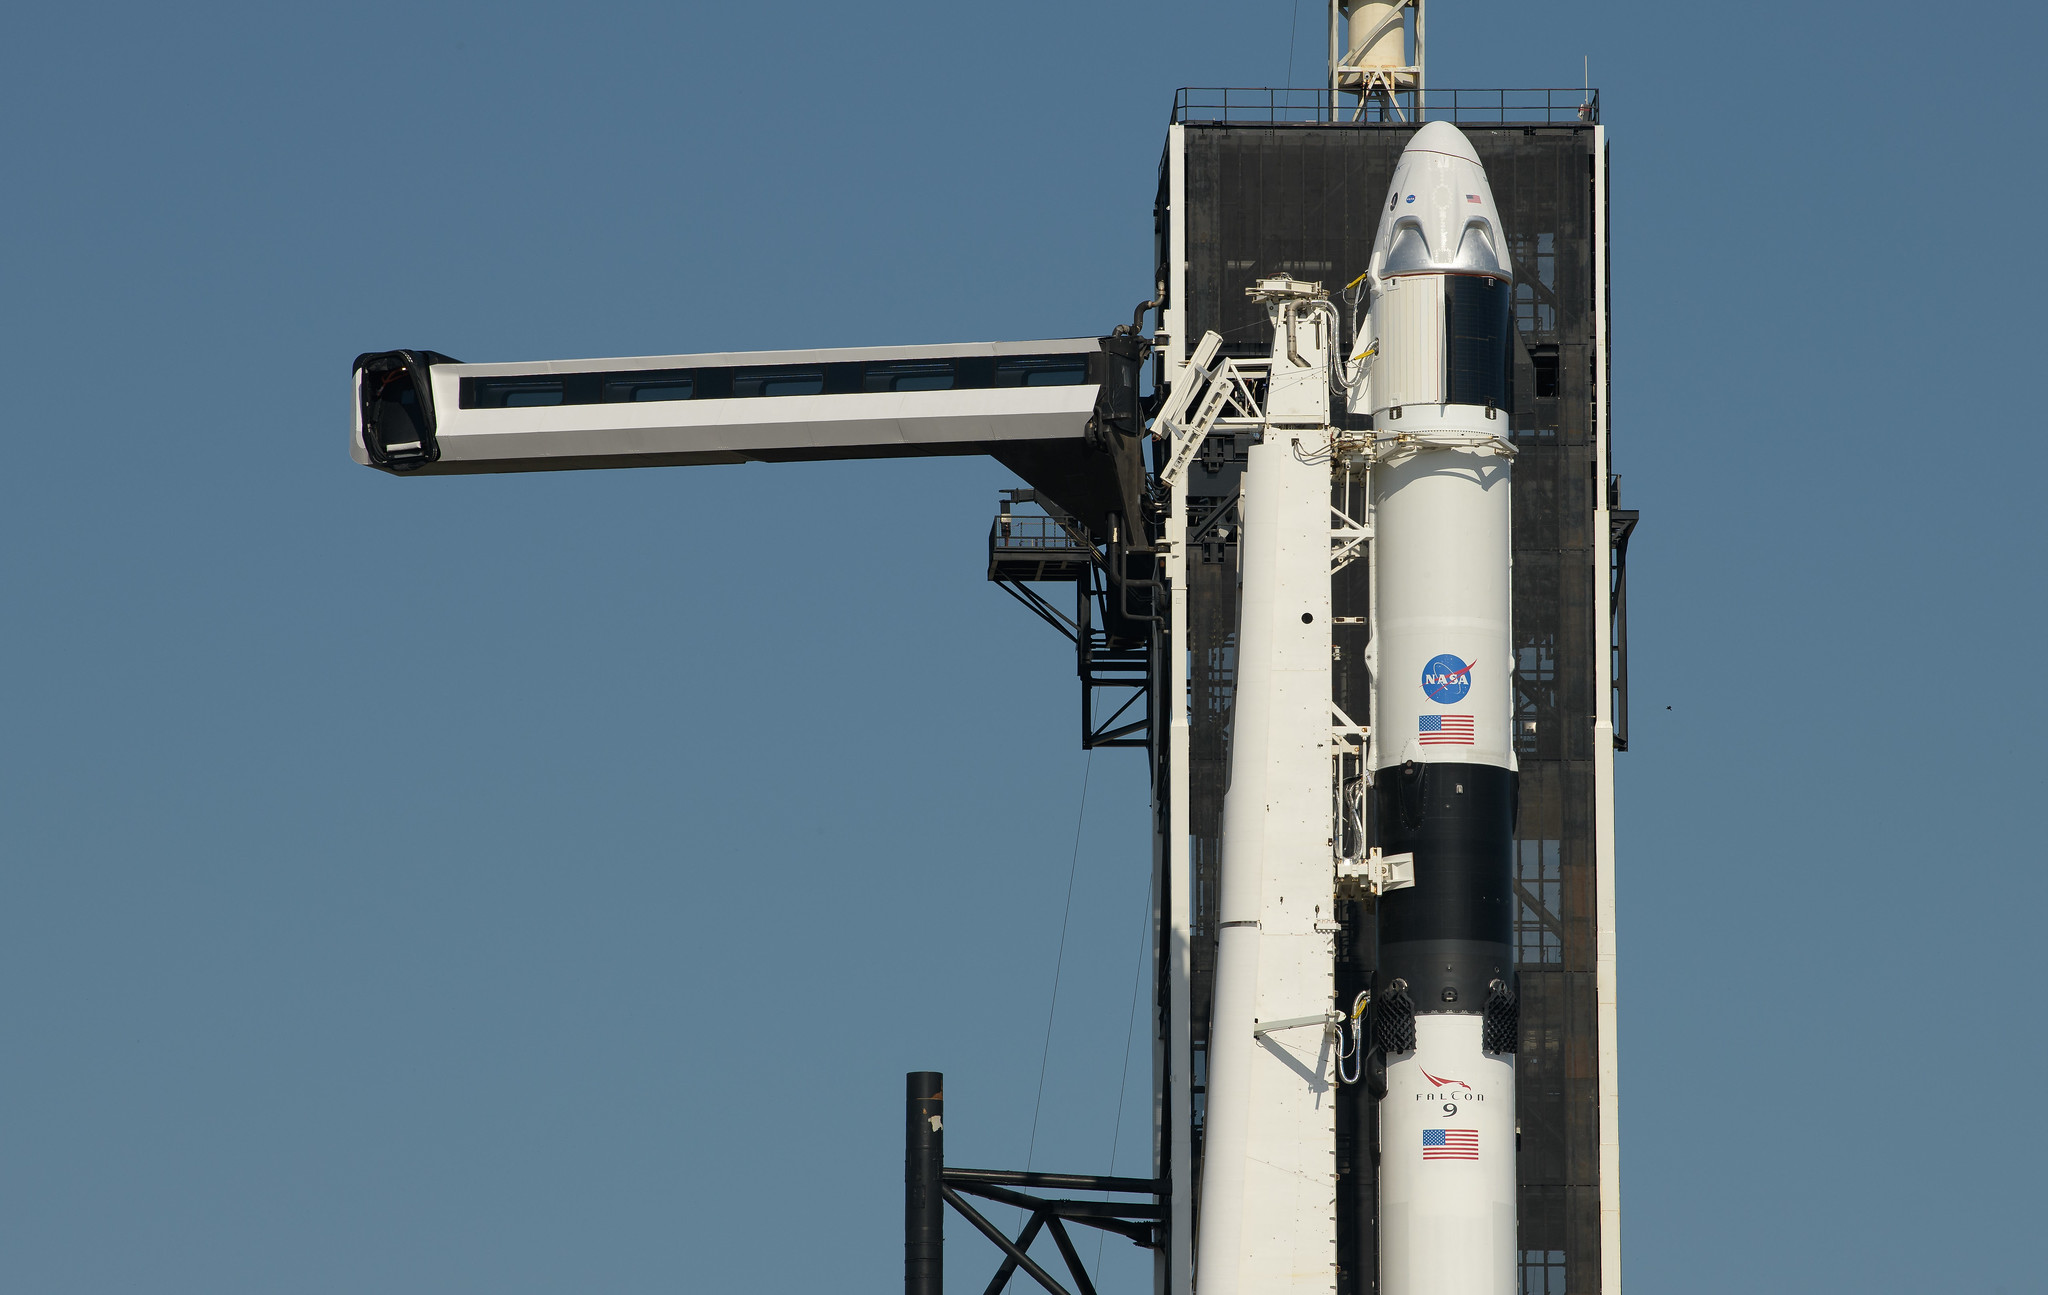 SpaceX’s Crew Dragon capsule sits atop its Falcon rocket, ready to launch.